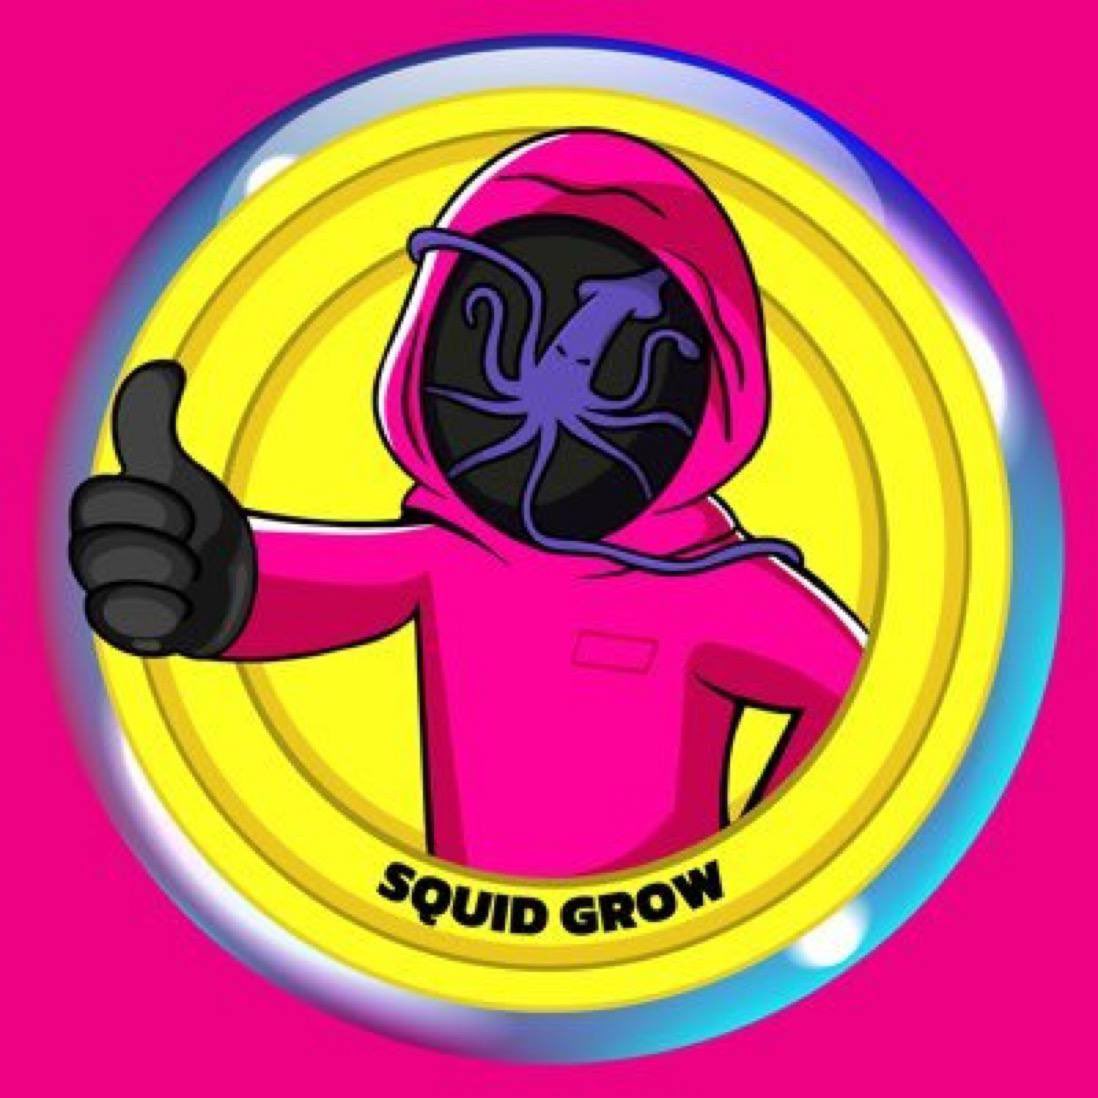 #SquidGrow is destined to Billions!